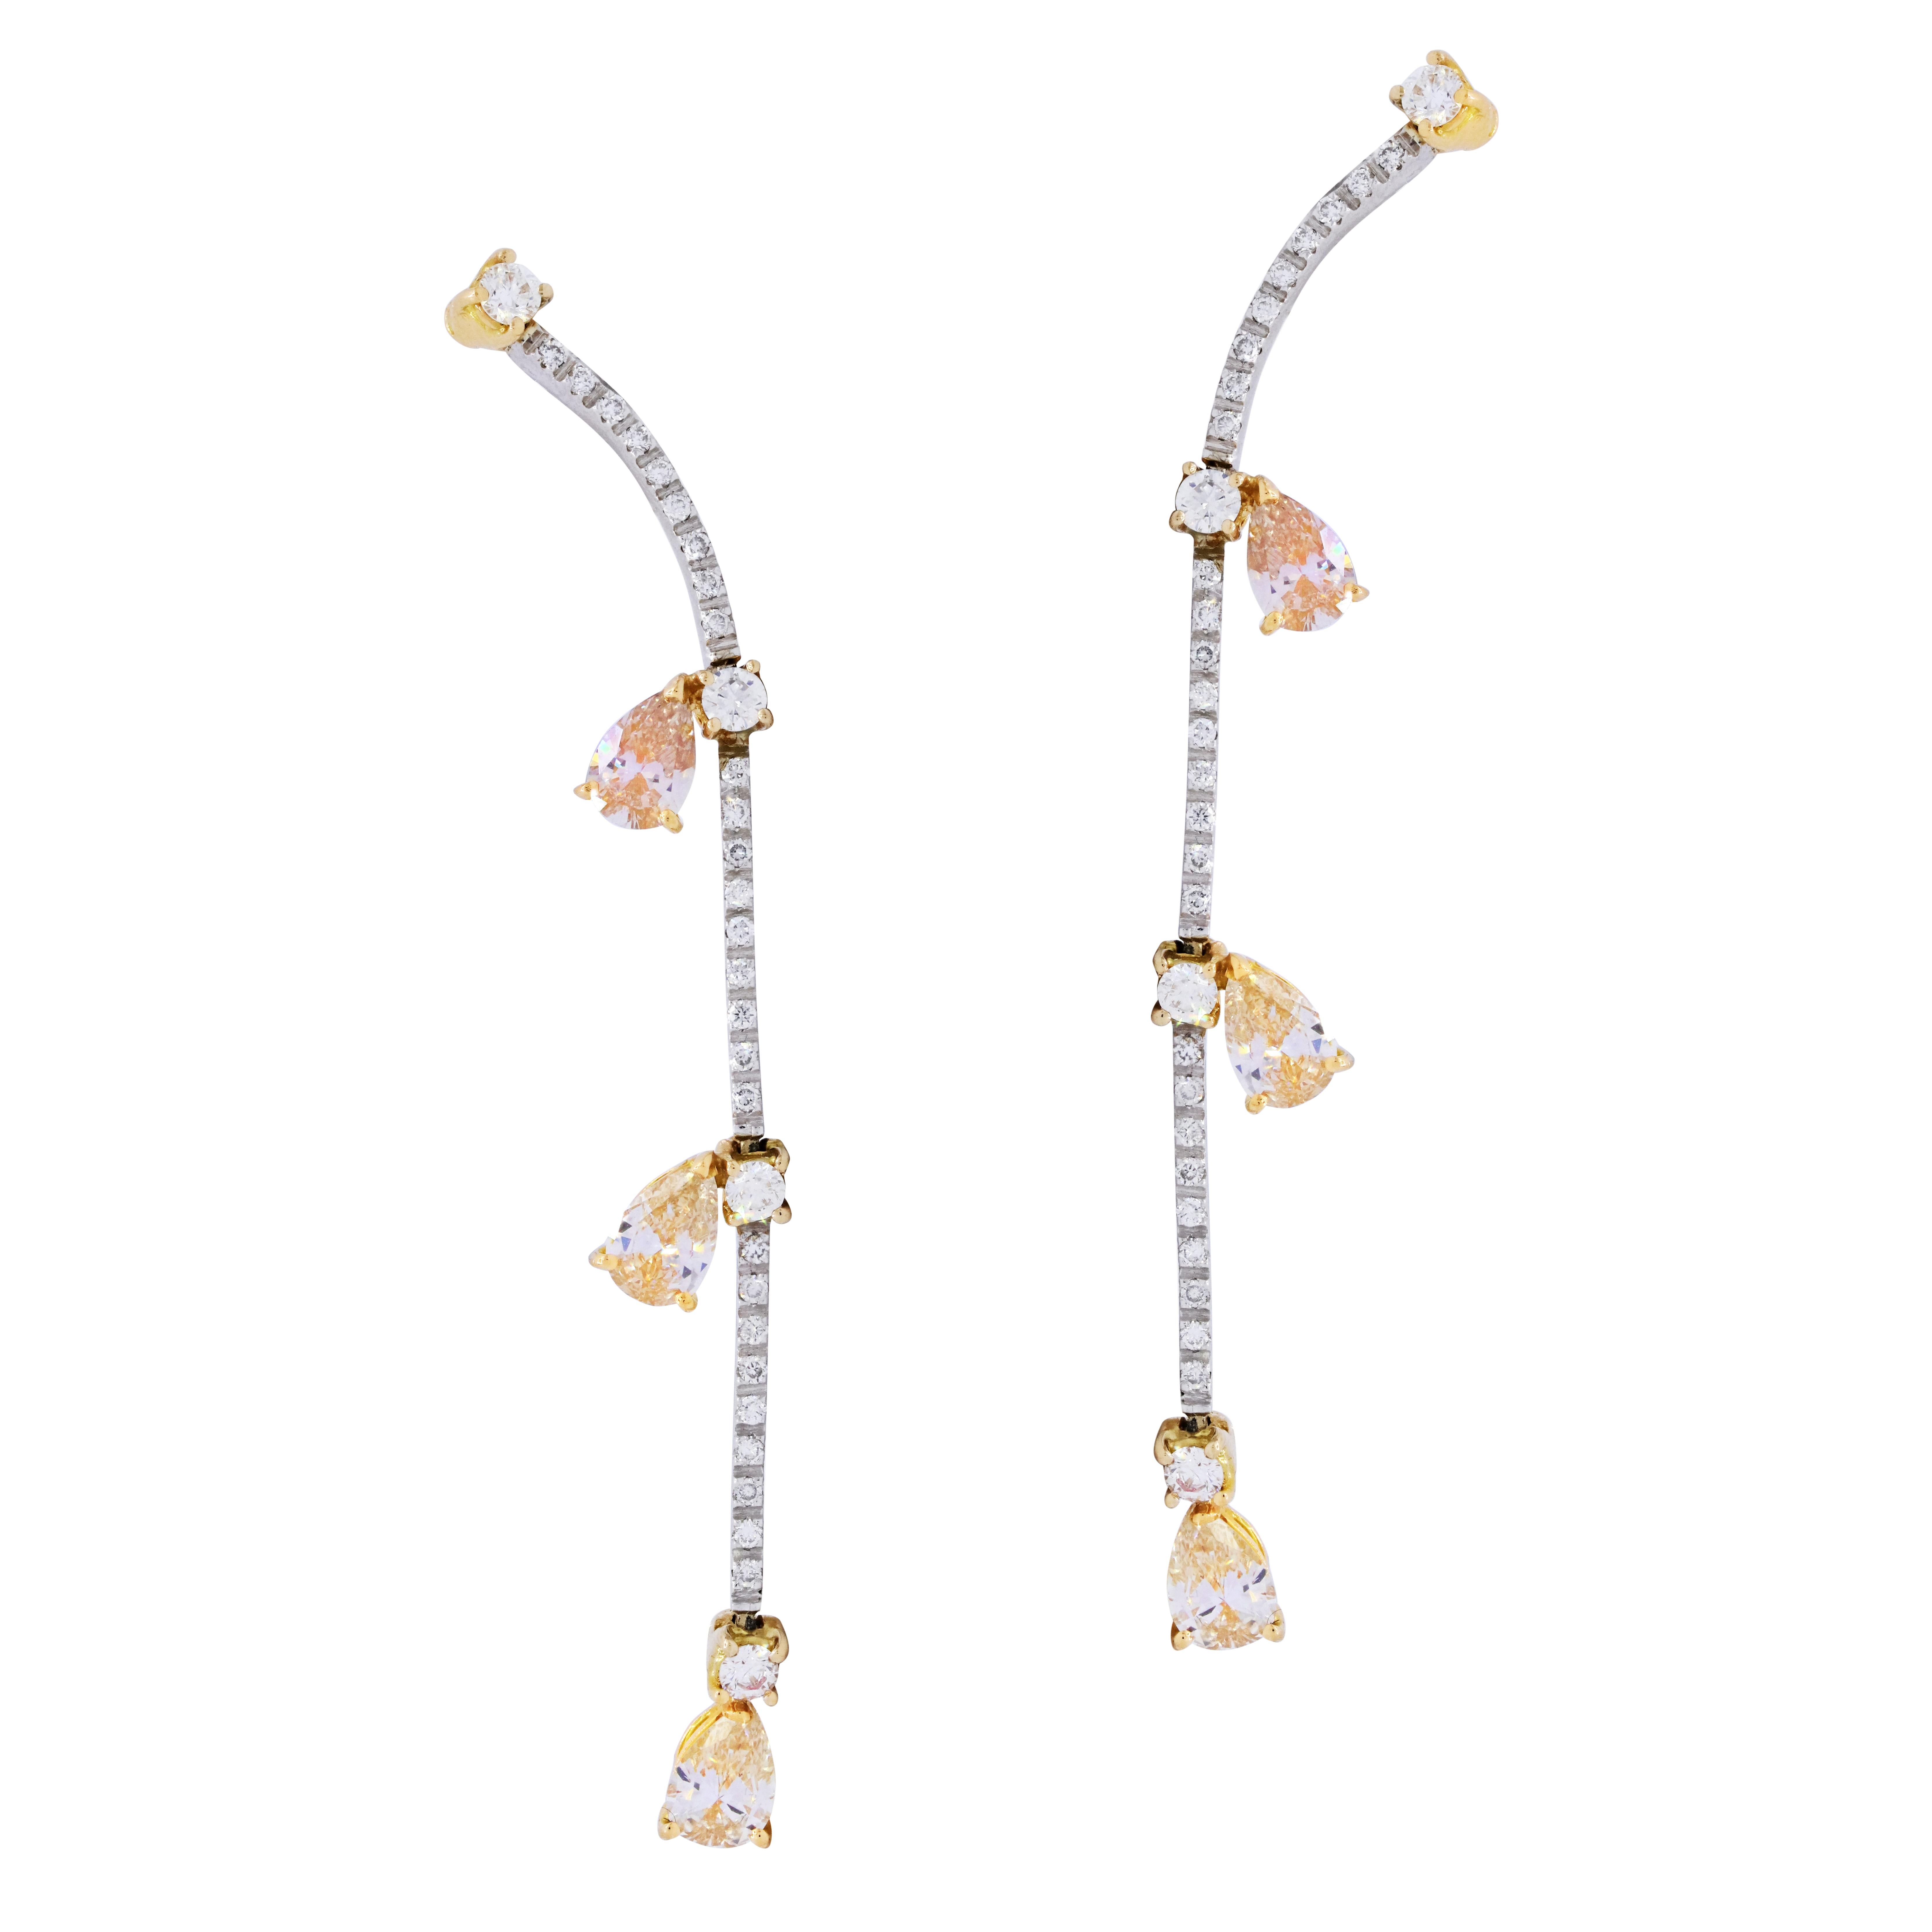 18k white and yellow gold hanging diamonds earrings, features 3.00 carats of  pear shape brown diamonds and white round diamonds.
